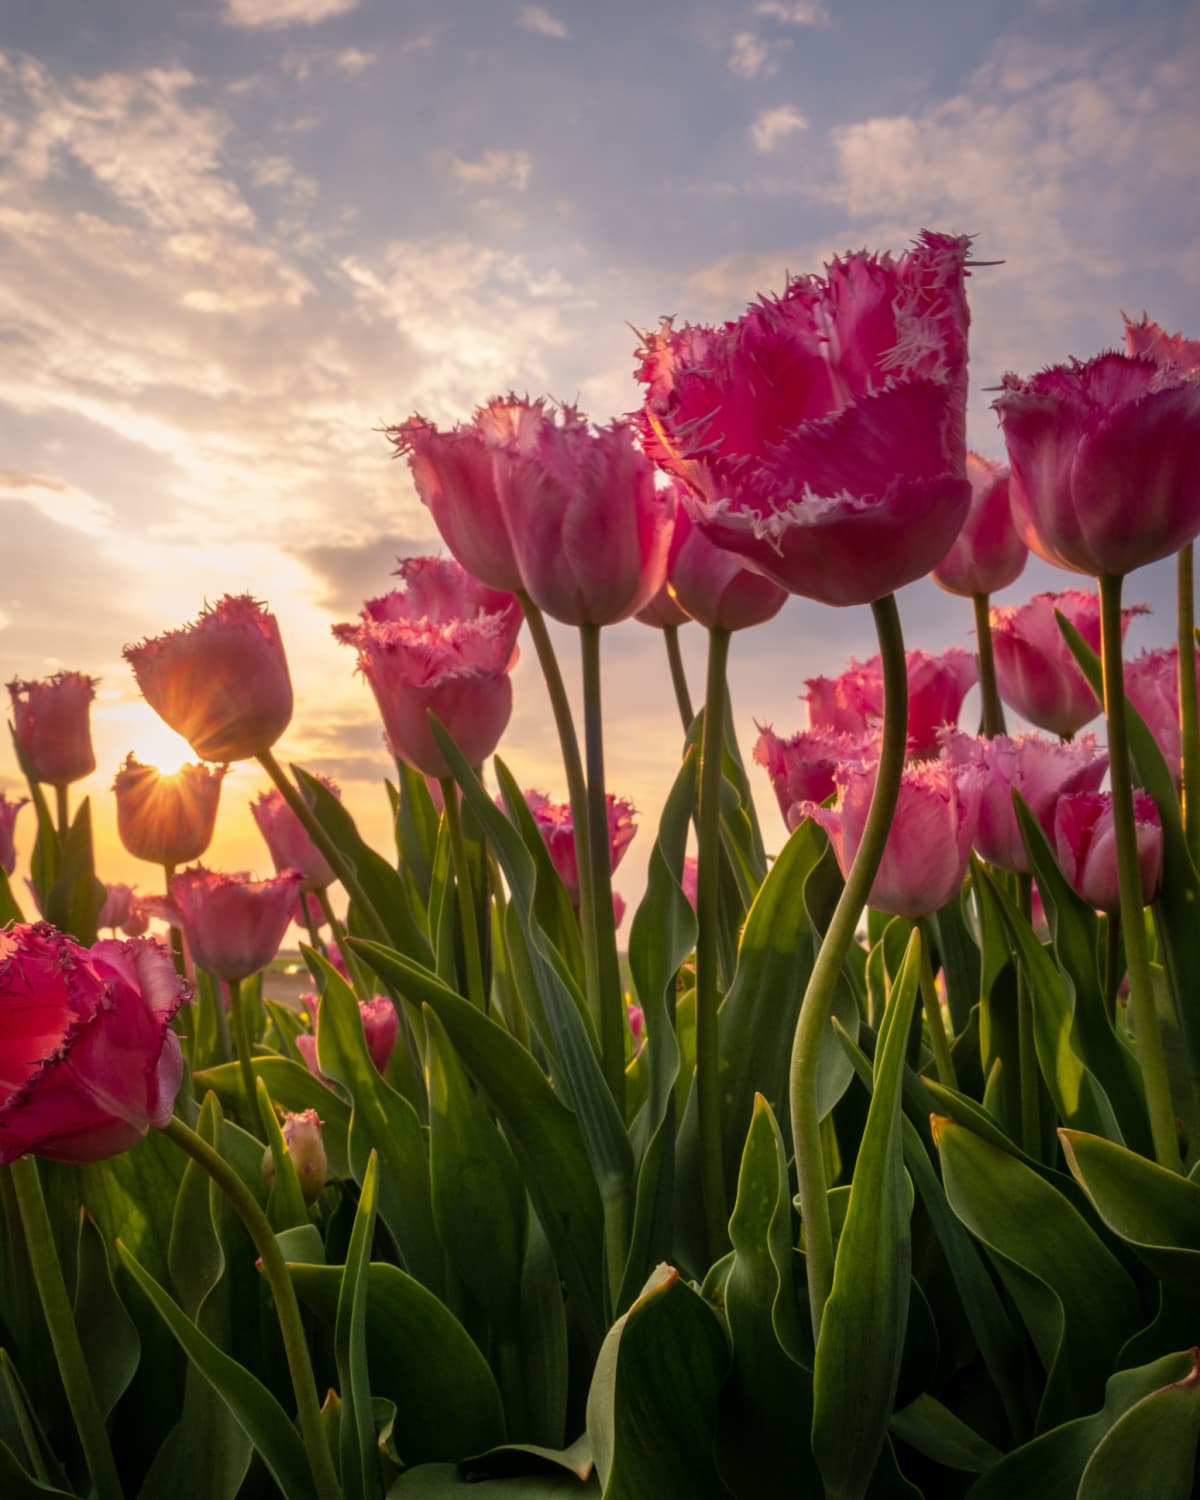 Pink tulip field in Germany with beautiful light from the evening sun.